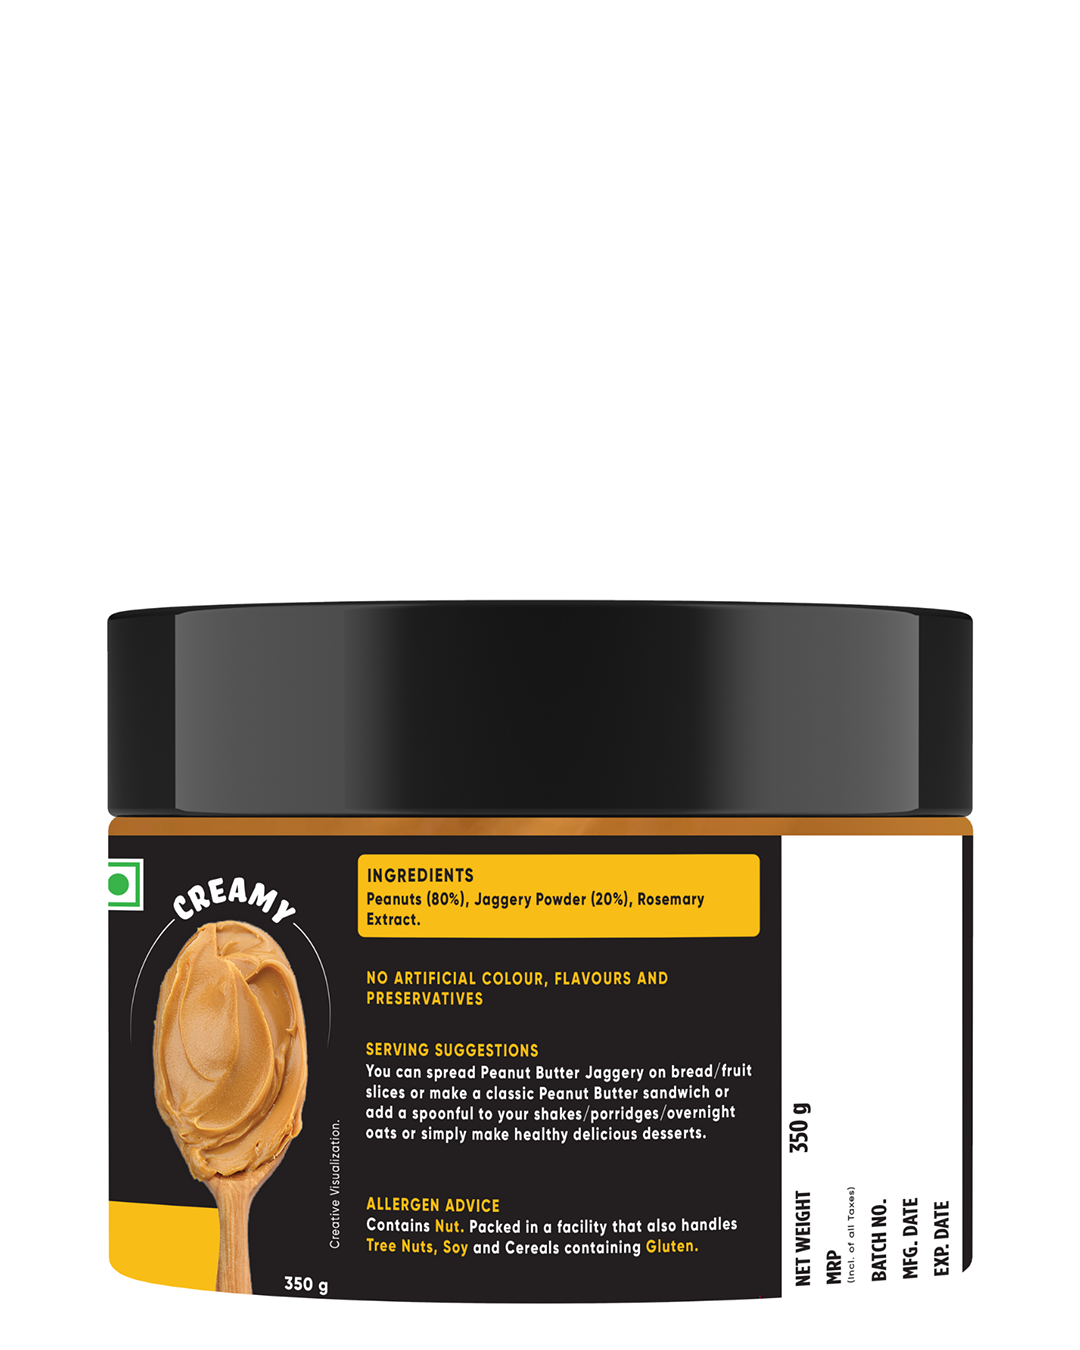 True elements jaggery peanut butter ingredients and nutrients